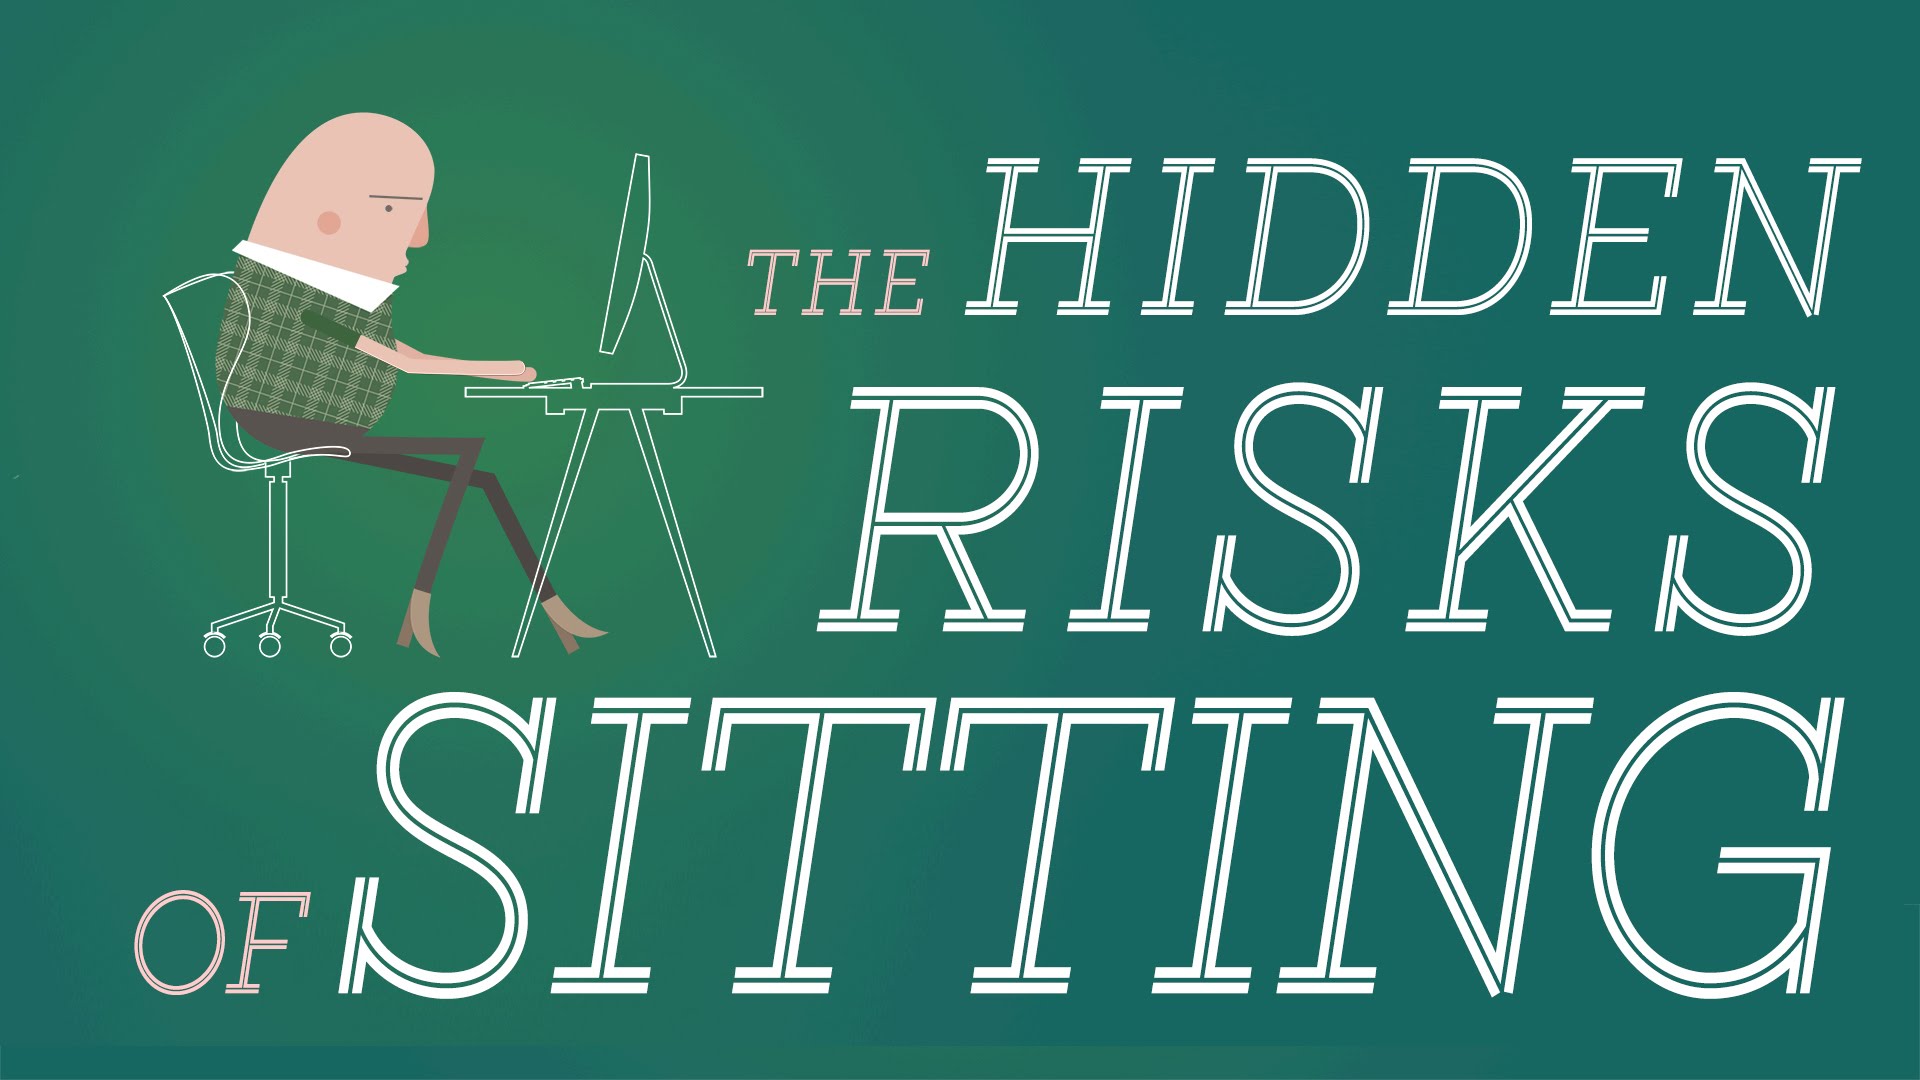 #Video-Why Sitting is BAD